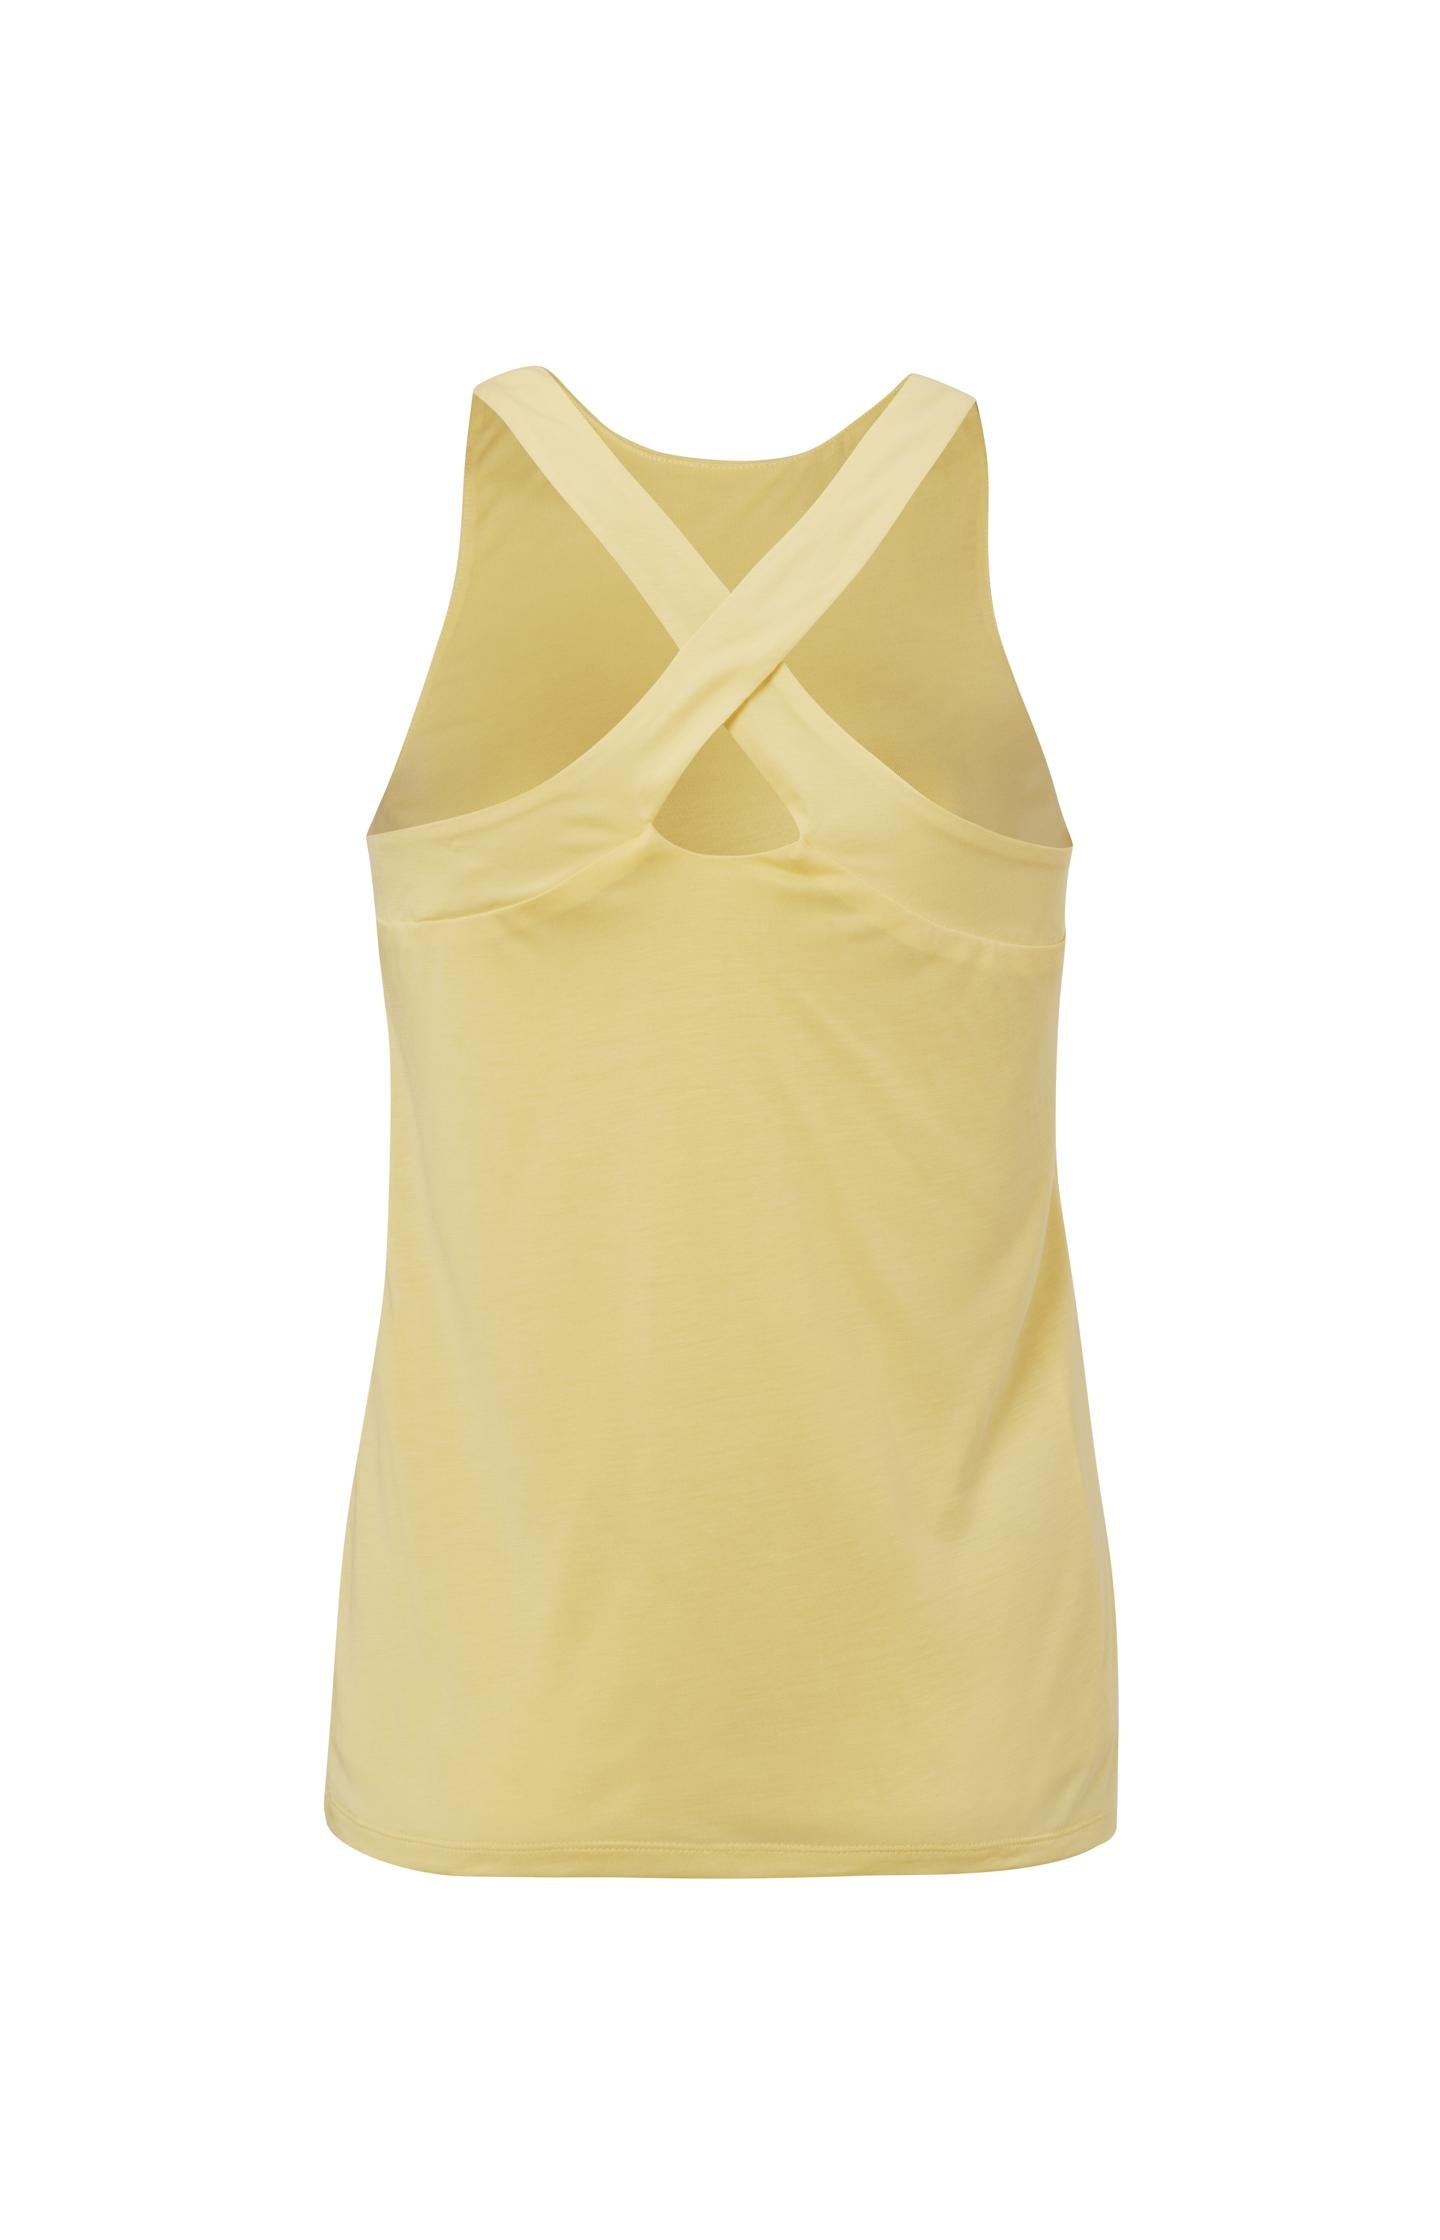 Singlet with round neck and crossed straps on back